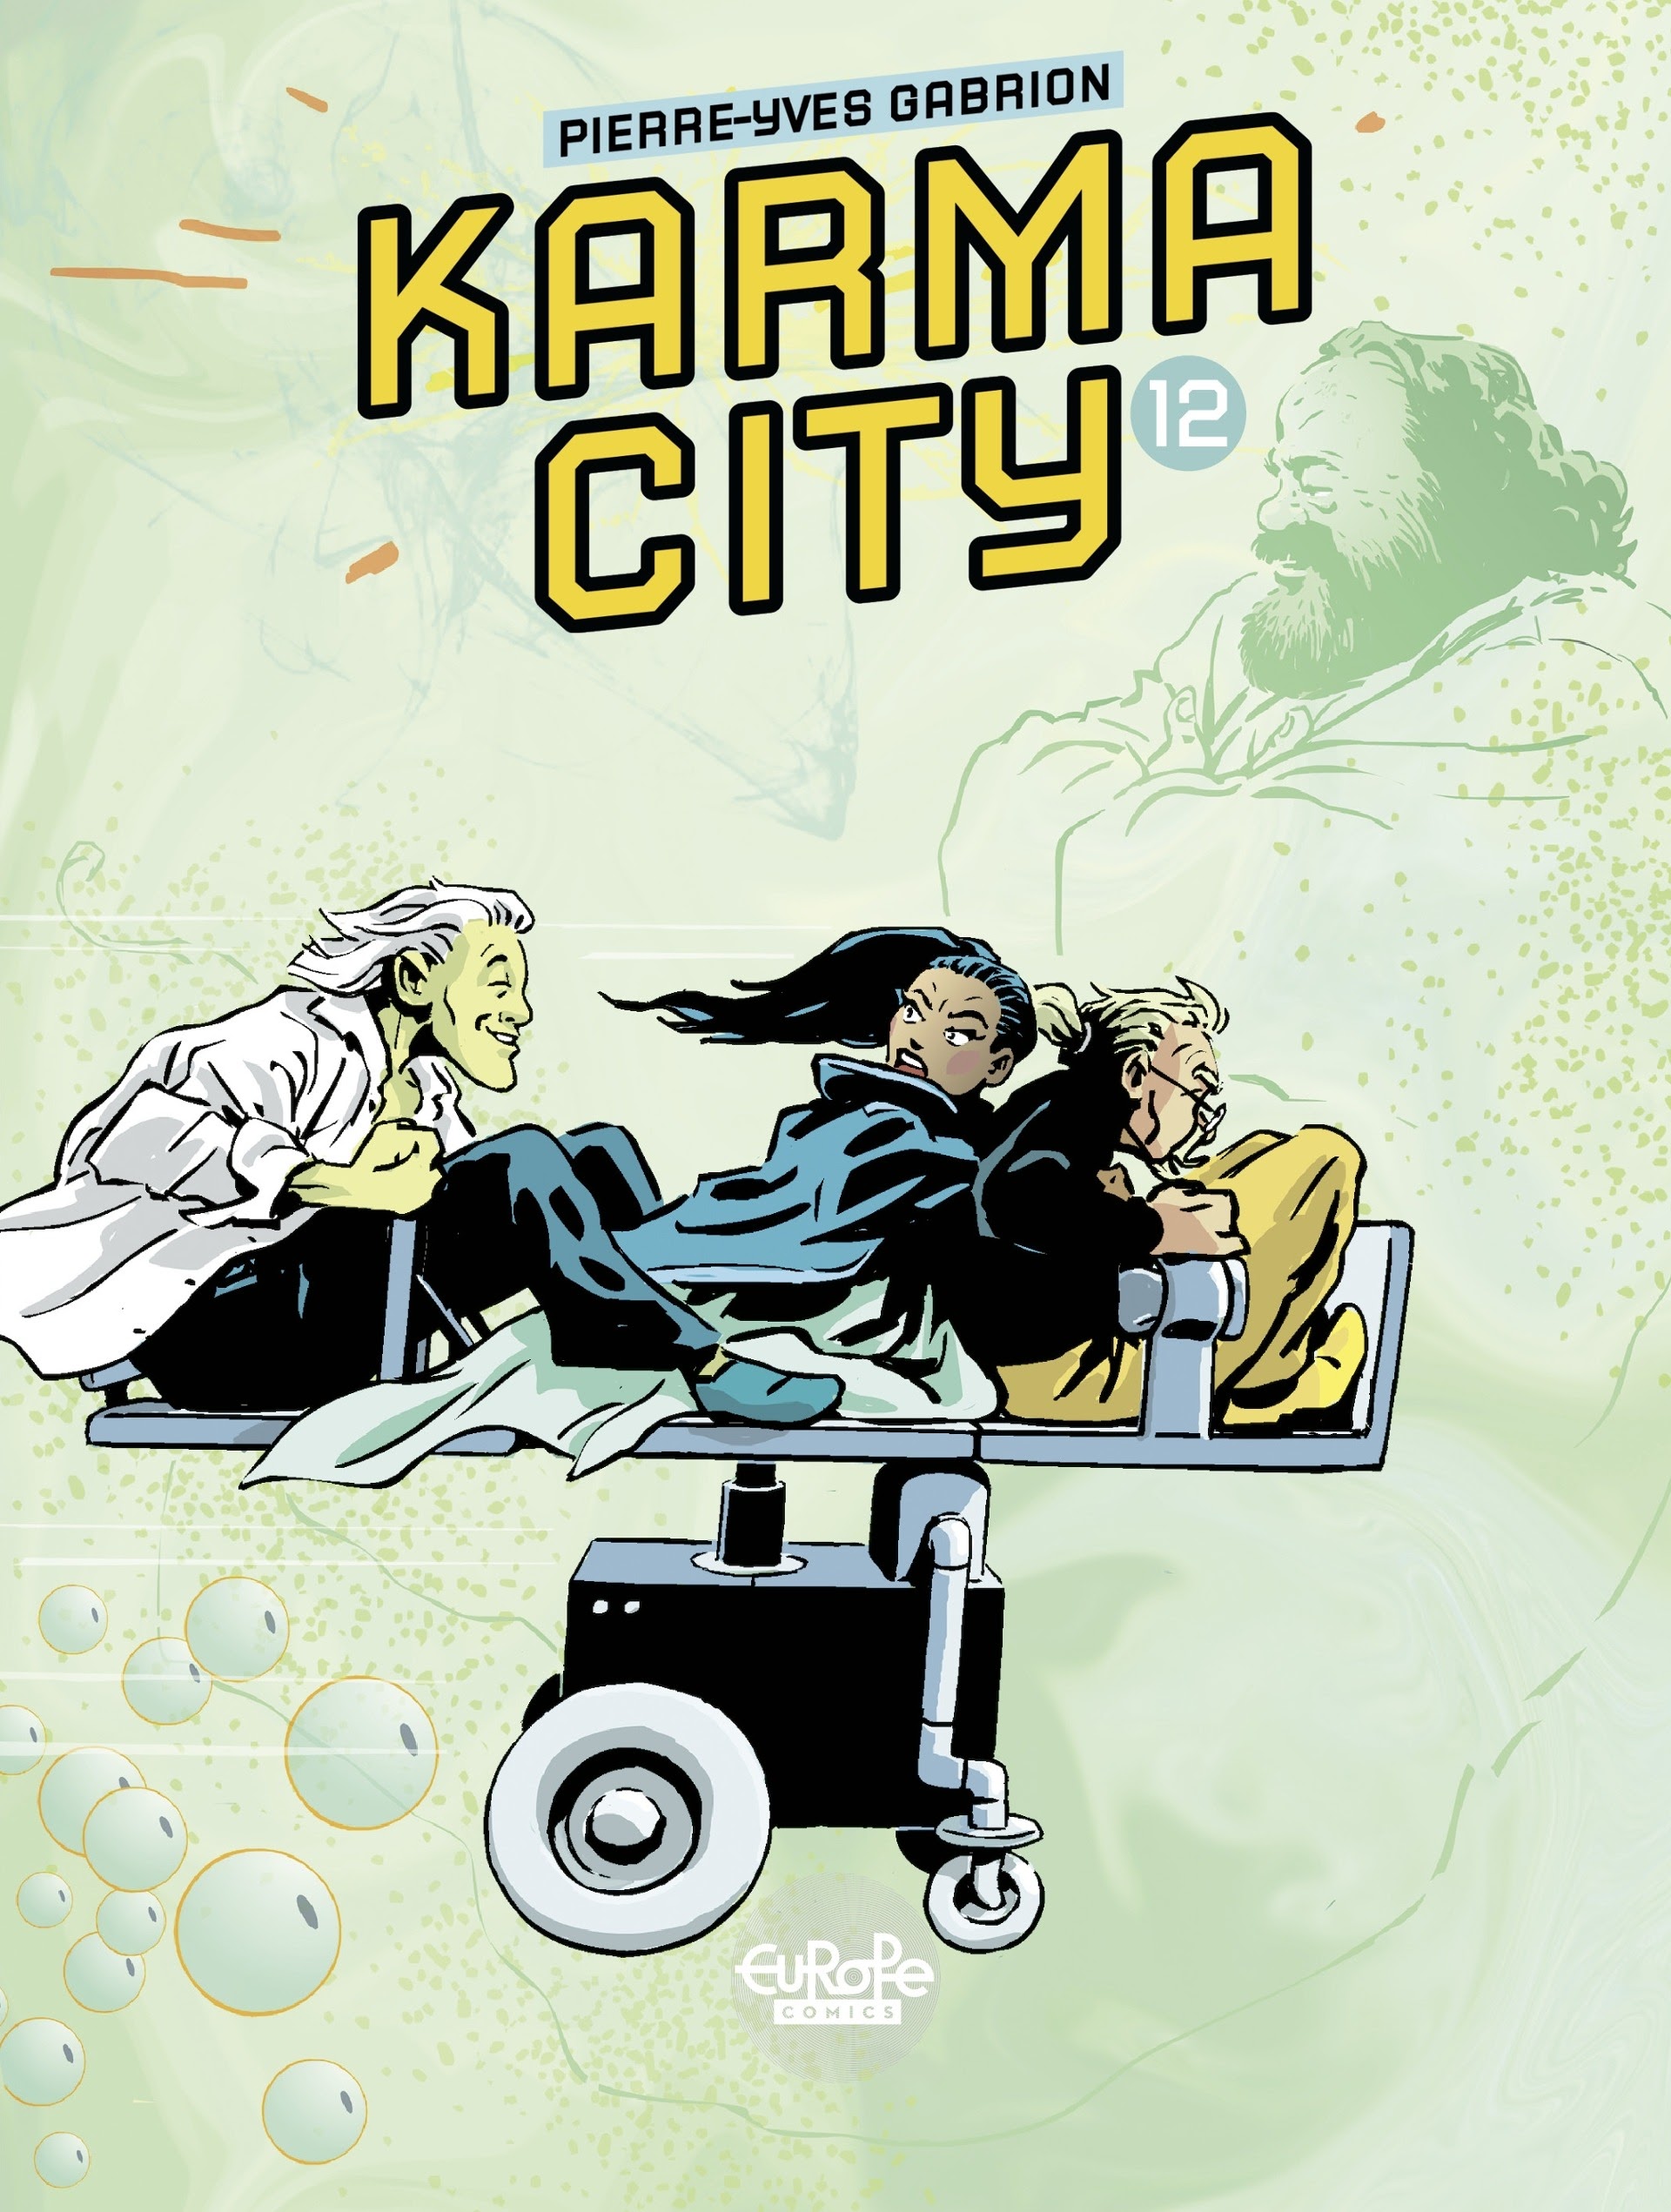 Read online Karma City comic -  Issue #12 - 1